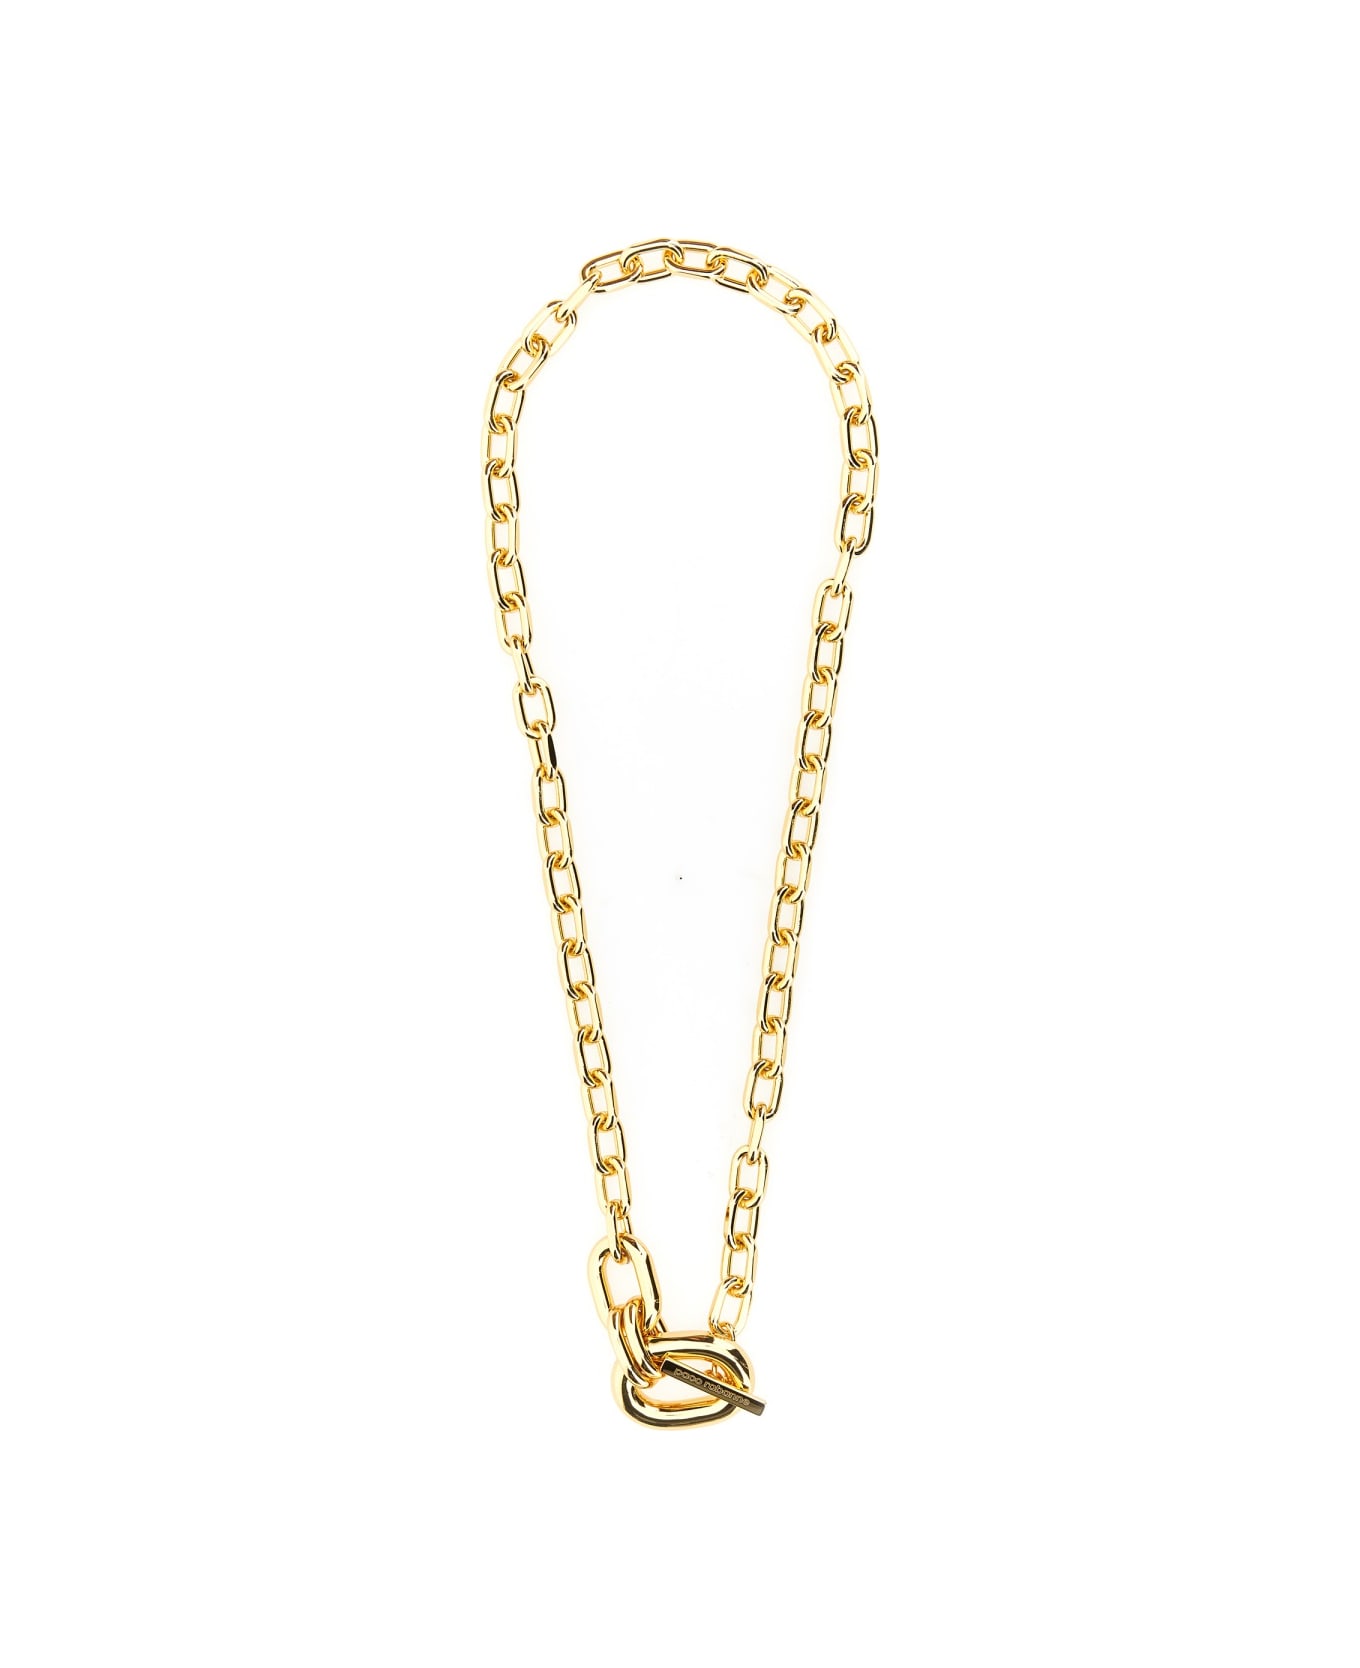 Paco Rabanne Chain Necklace - GOLD ネックレス